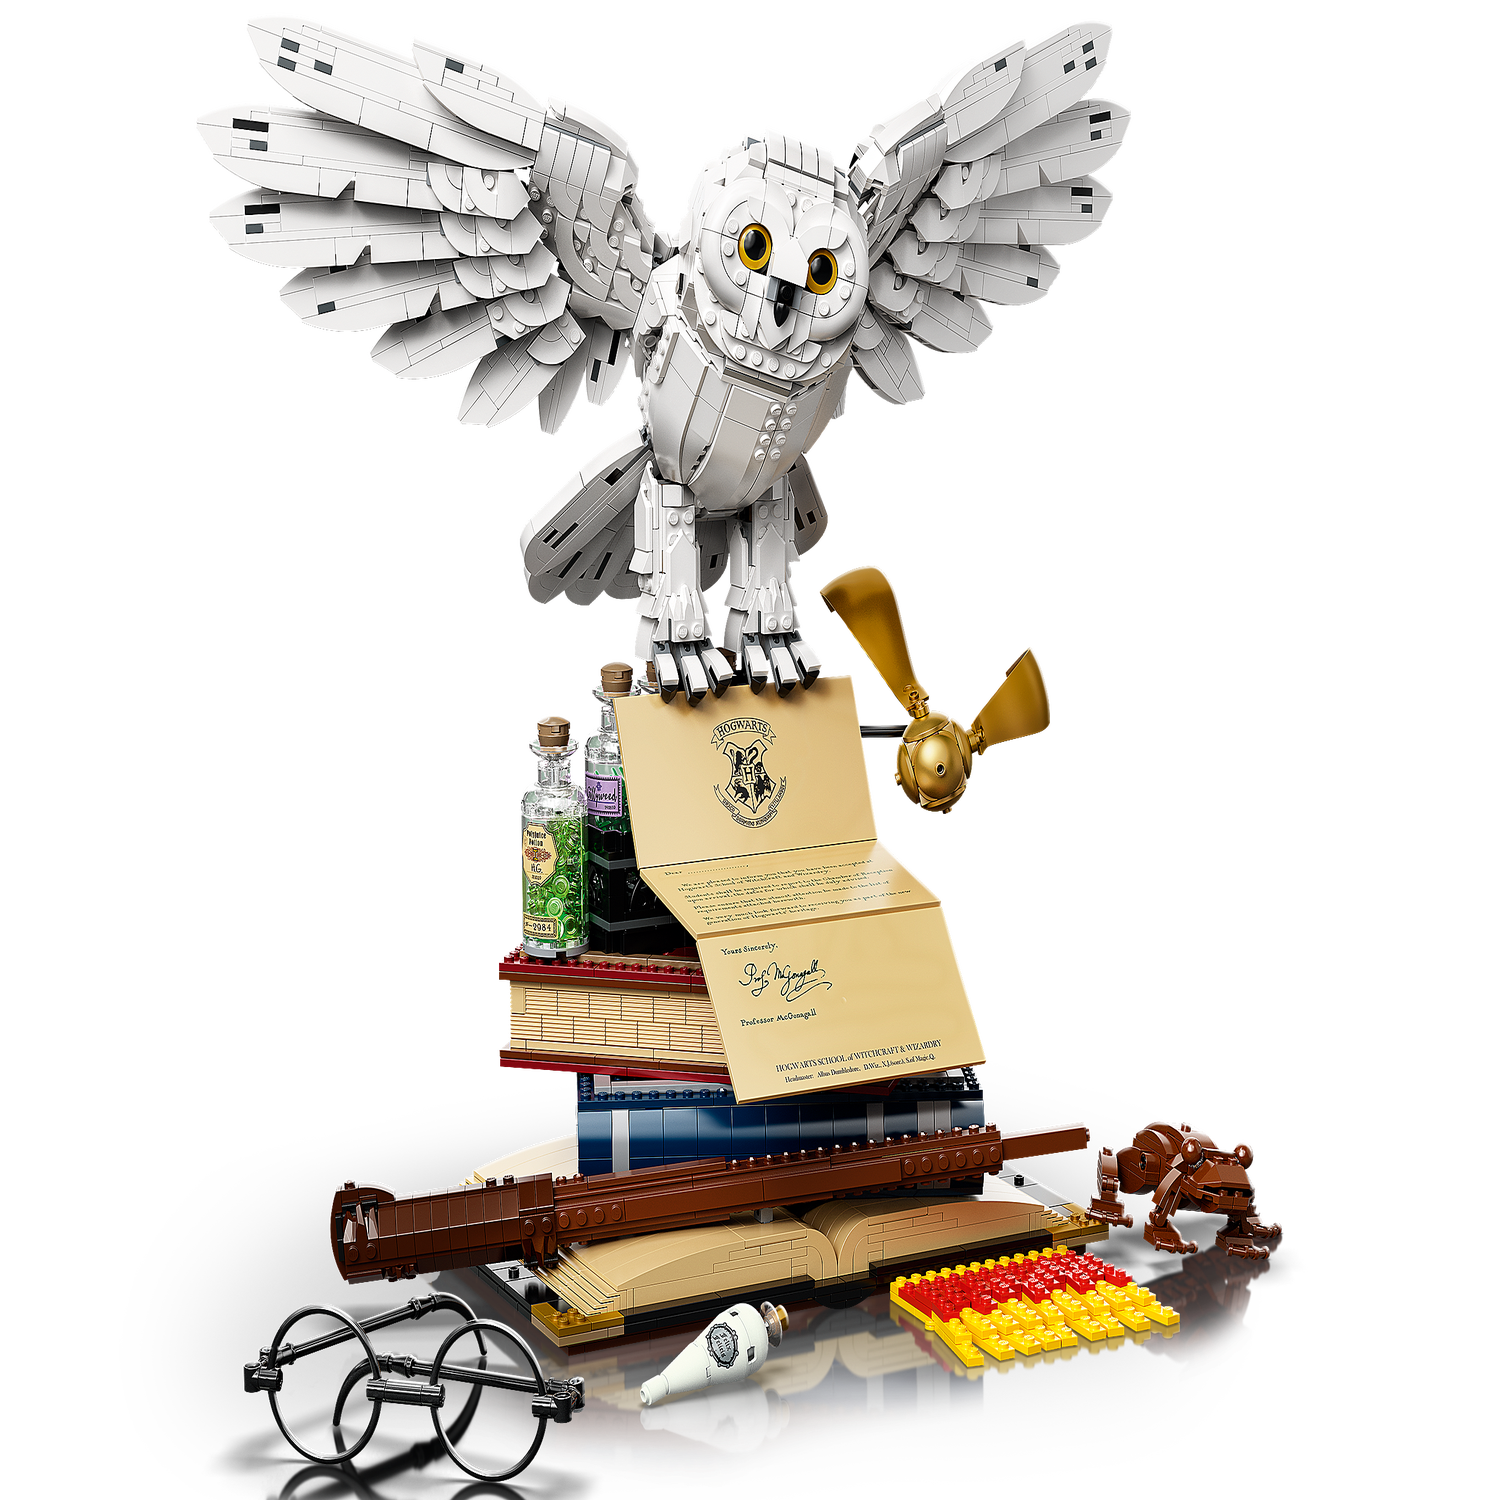 LEGO Harry Potter 76391 Hogwarts Icons Collectors' Edition : l'annonce  officielle - HelloBricks